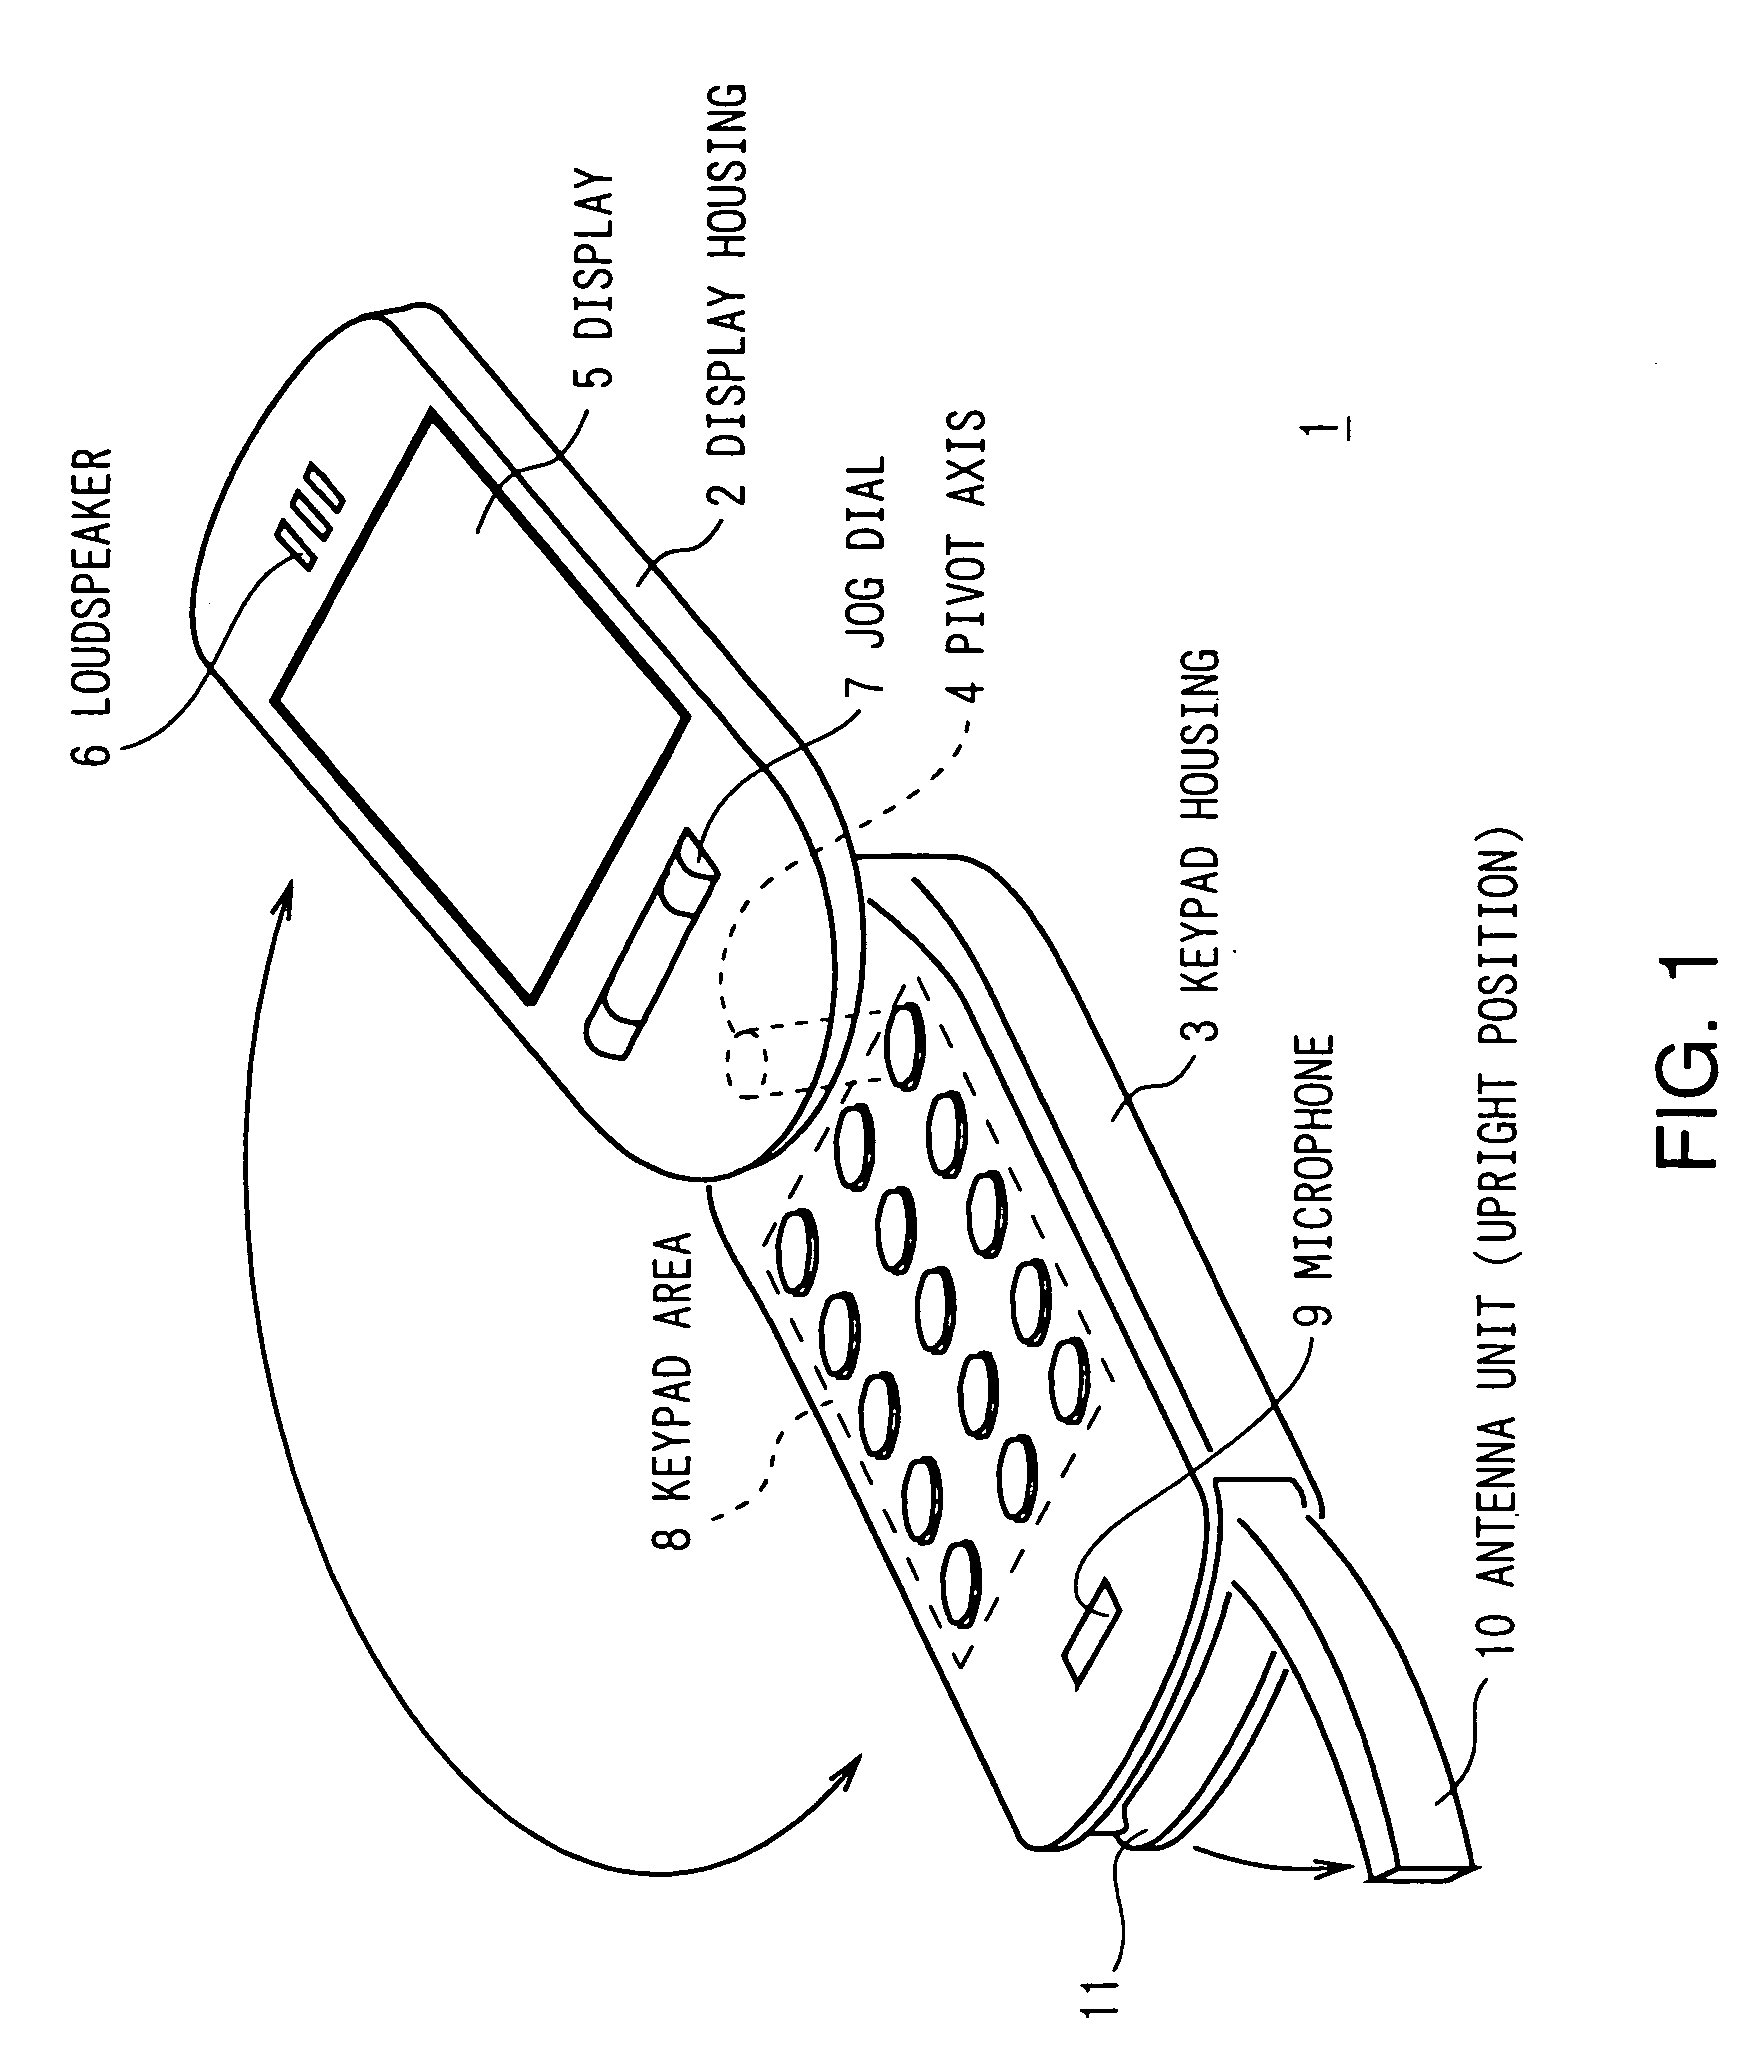 Antenna unit and portable wireless device